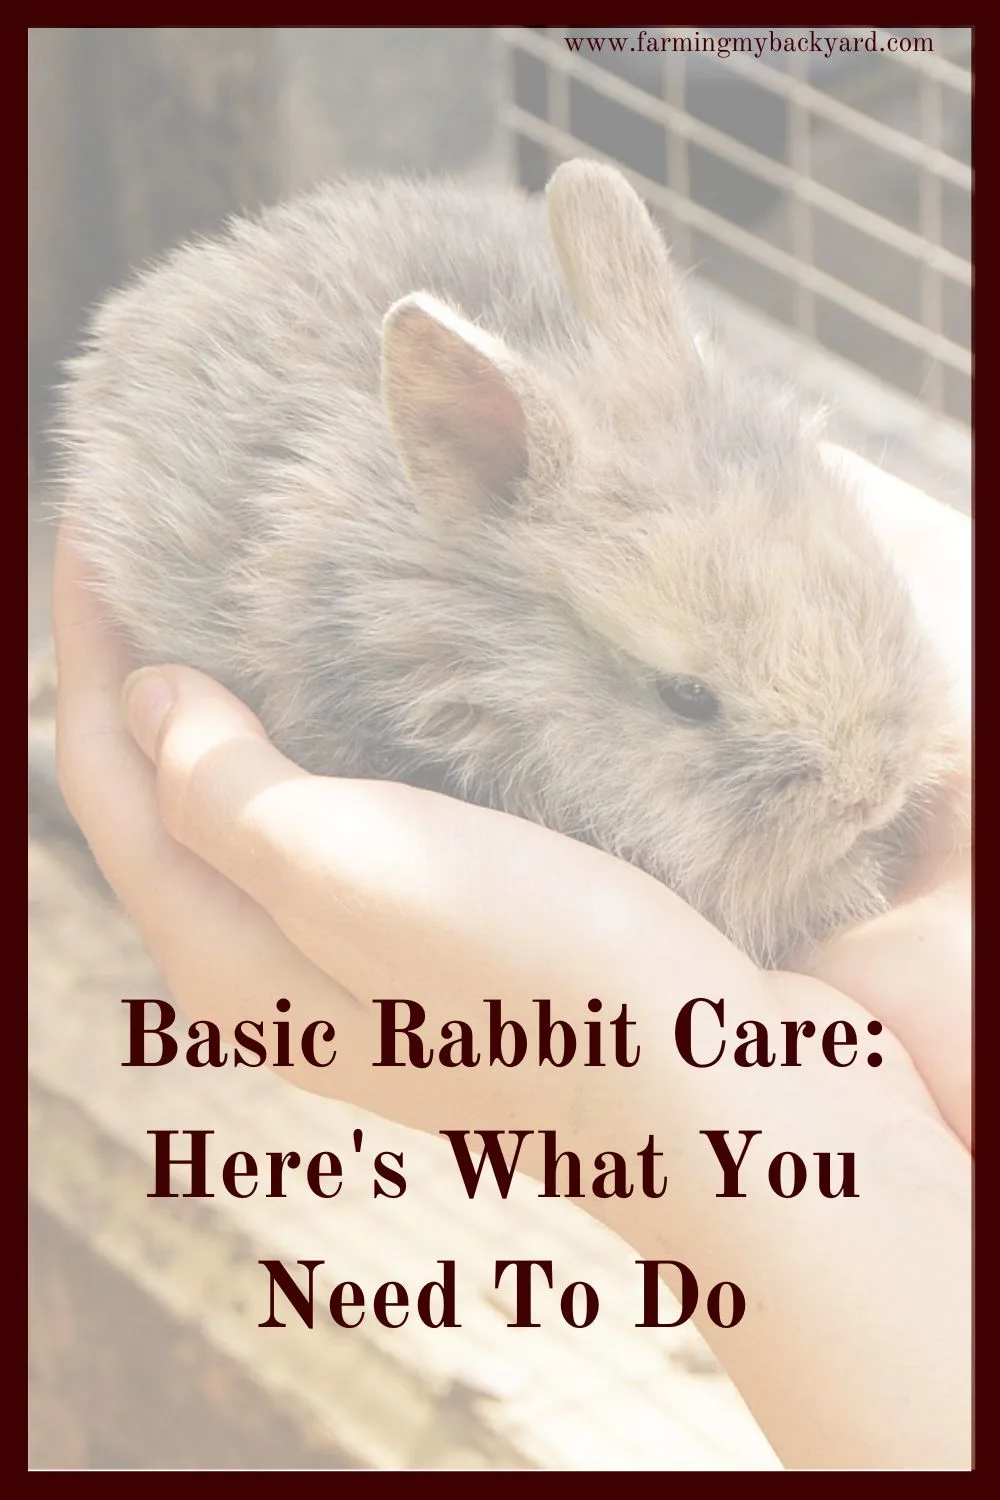 Basic rabbit care is pretty simple, and doesn't always take a lot of time. Here's what you need to do to raise your own meat rabbits.